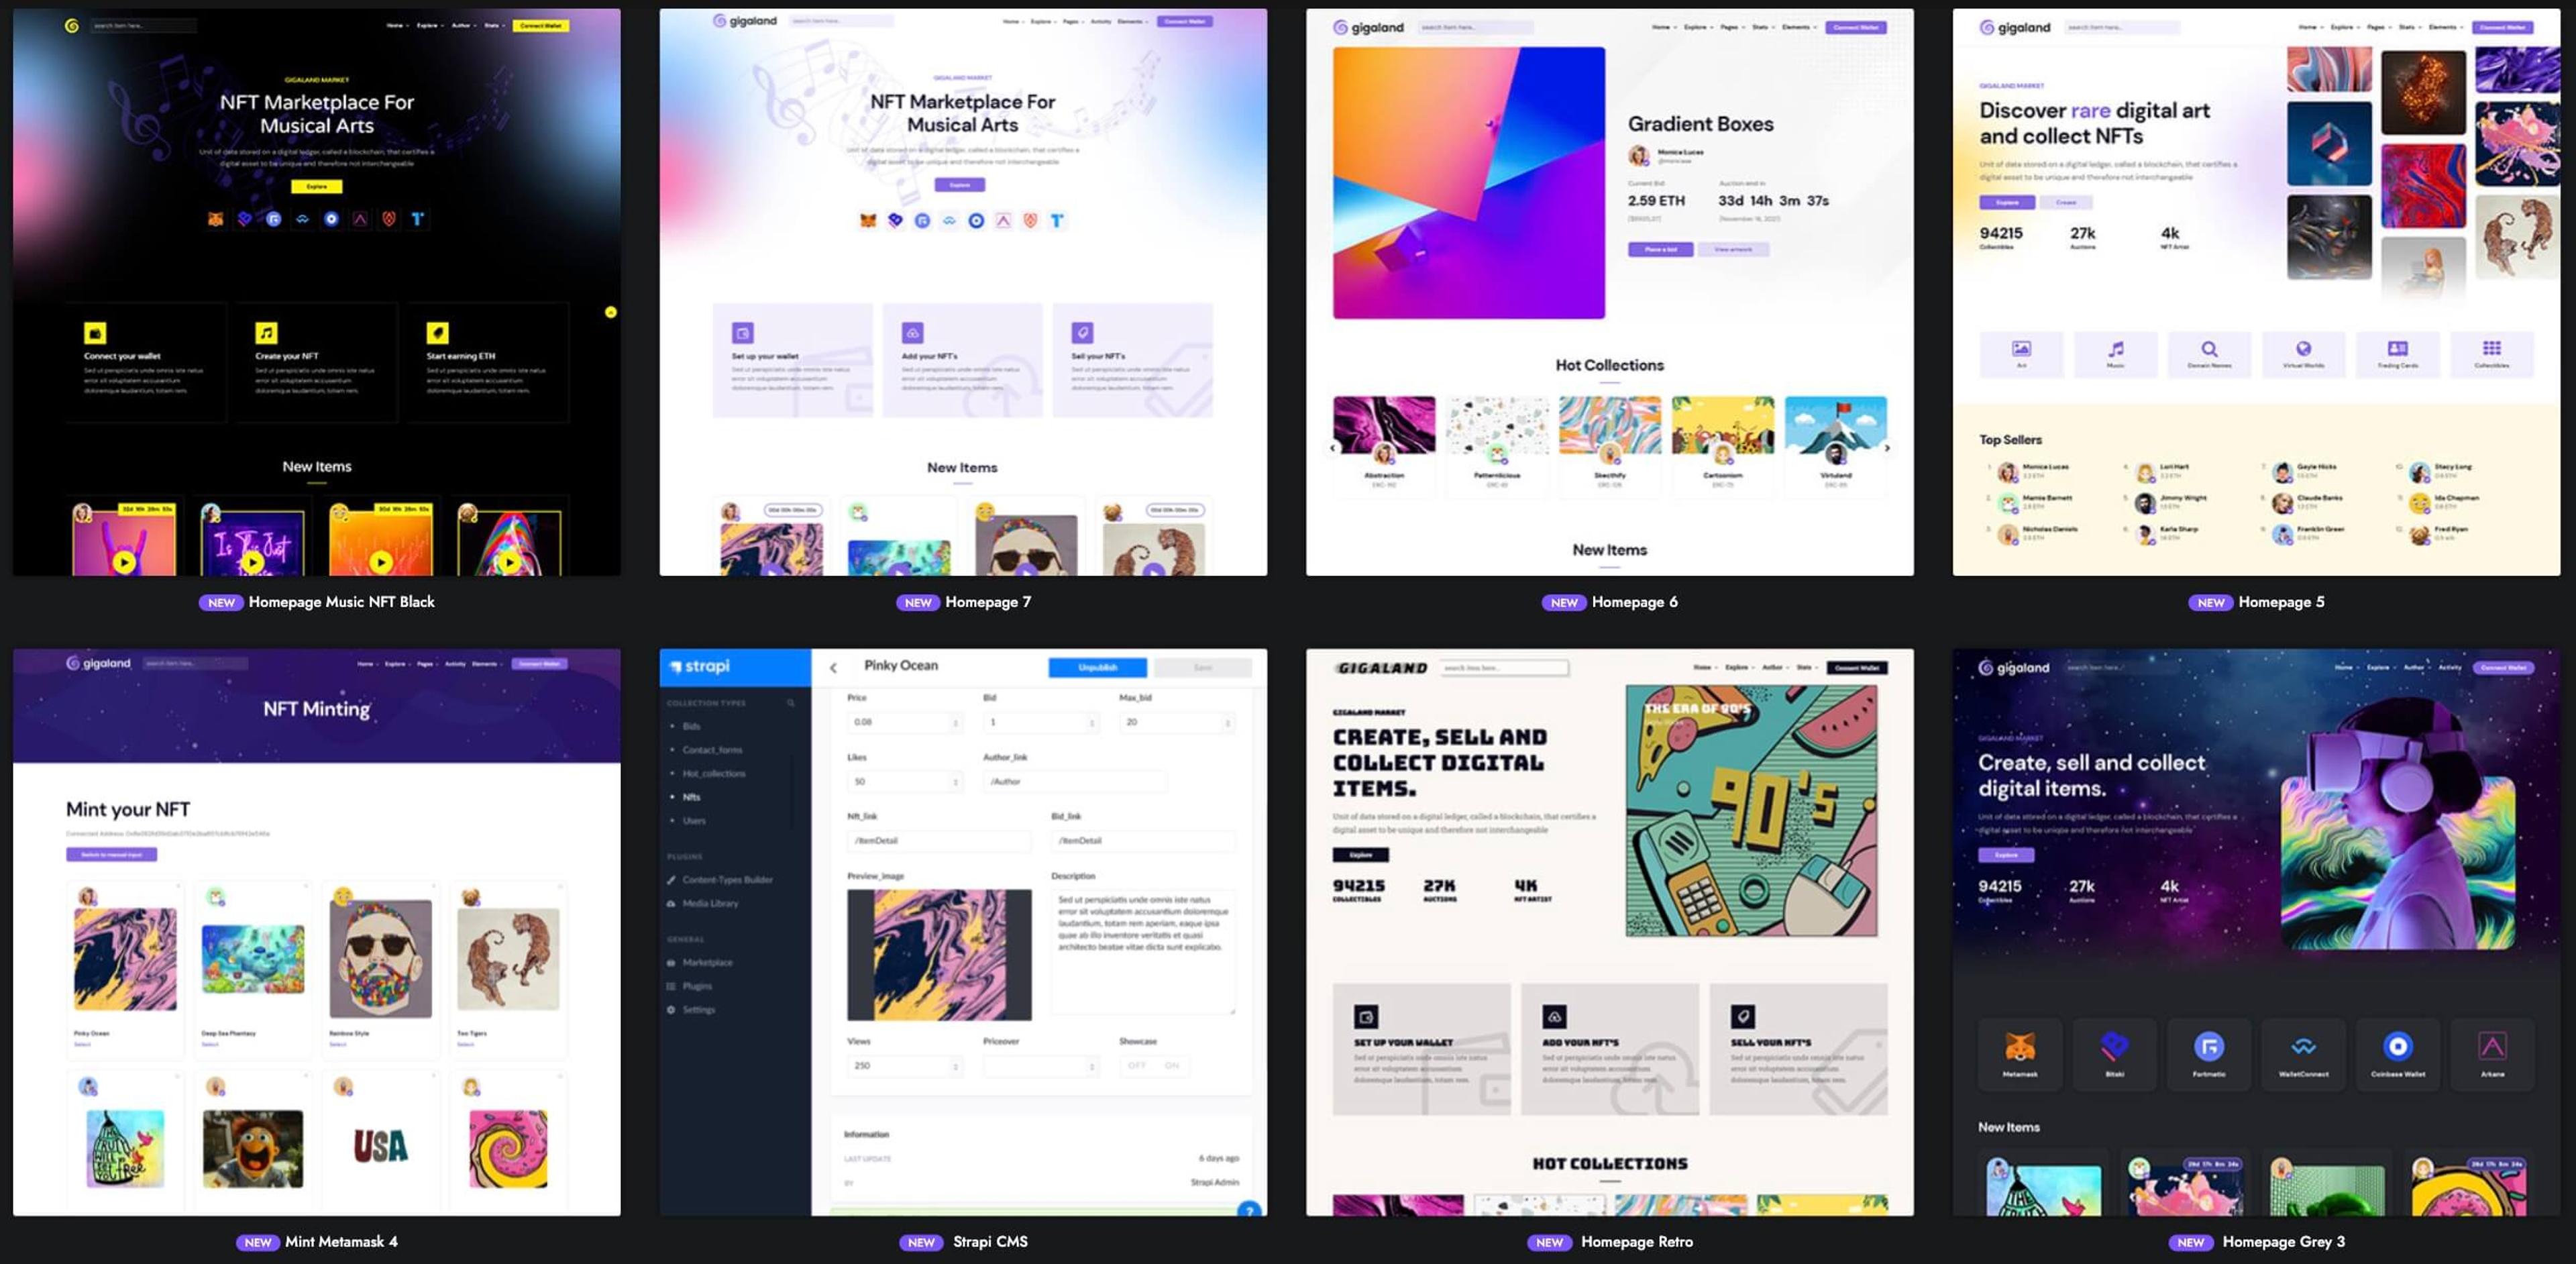 Samples of some of the NFT landing pages available in the starter kit